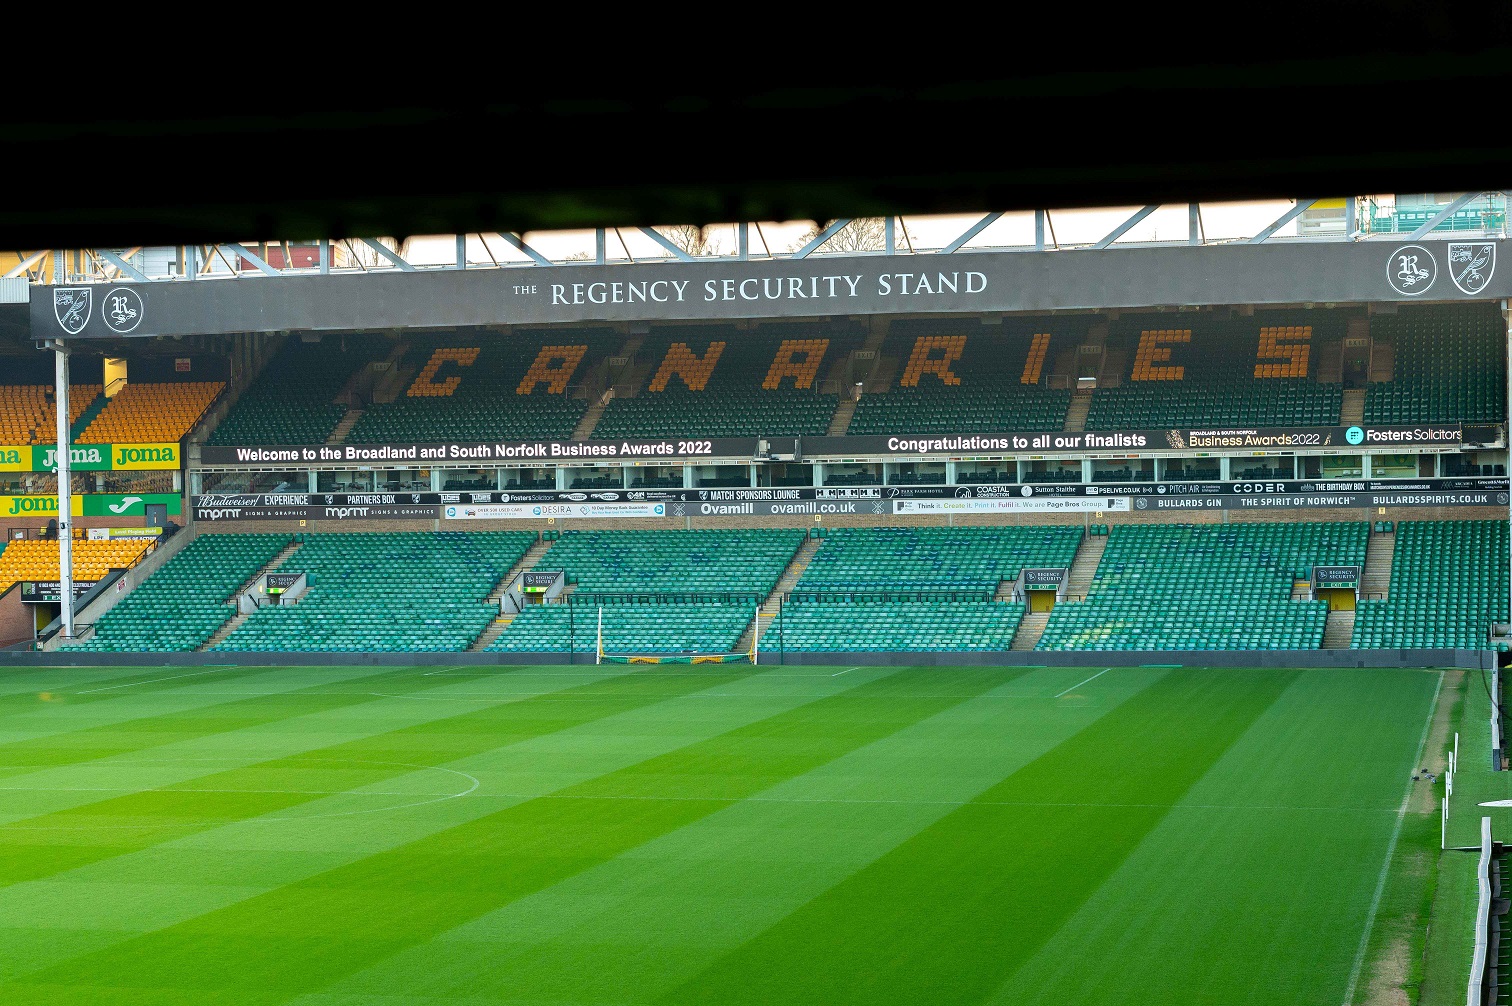 Norwich City Football Club pitch with digital sign welcome to the Business Awards 2022